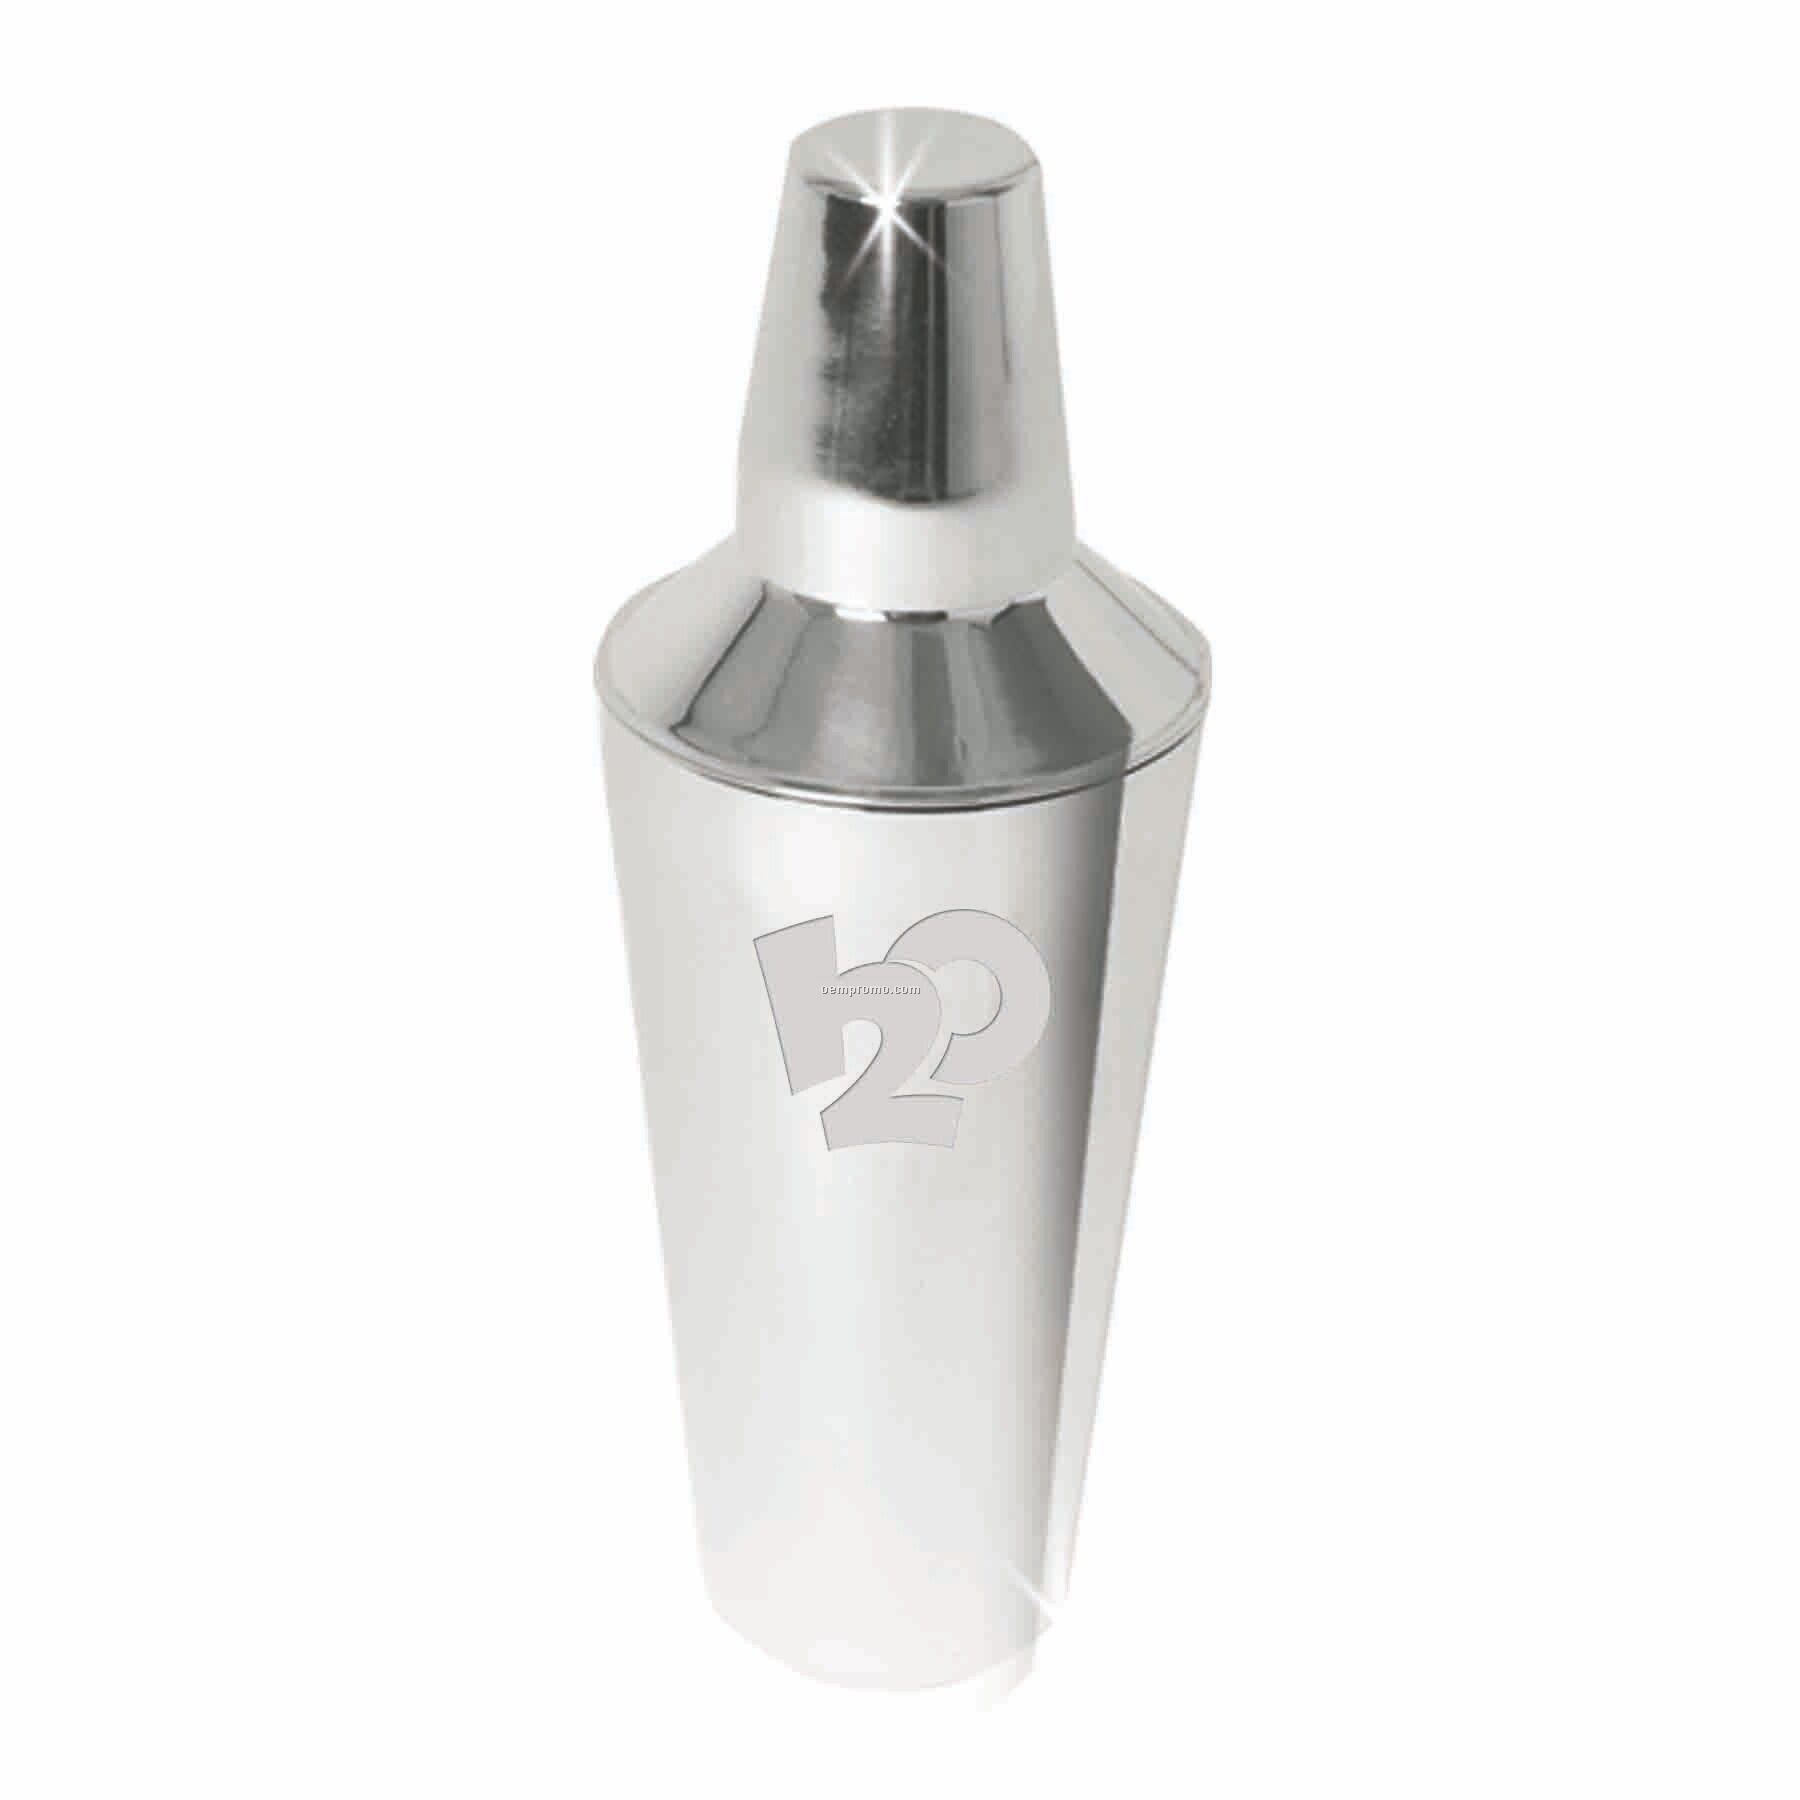 28 Oz. Stainless Steel Martini Selection Shaker (Deep Etch)